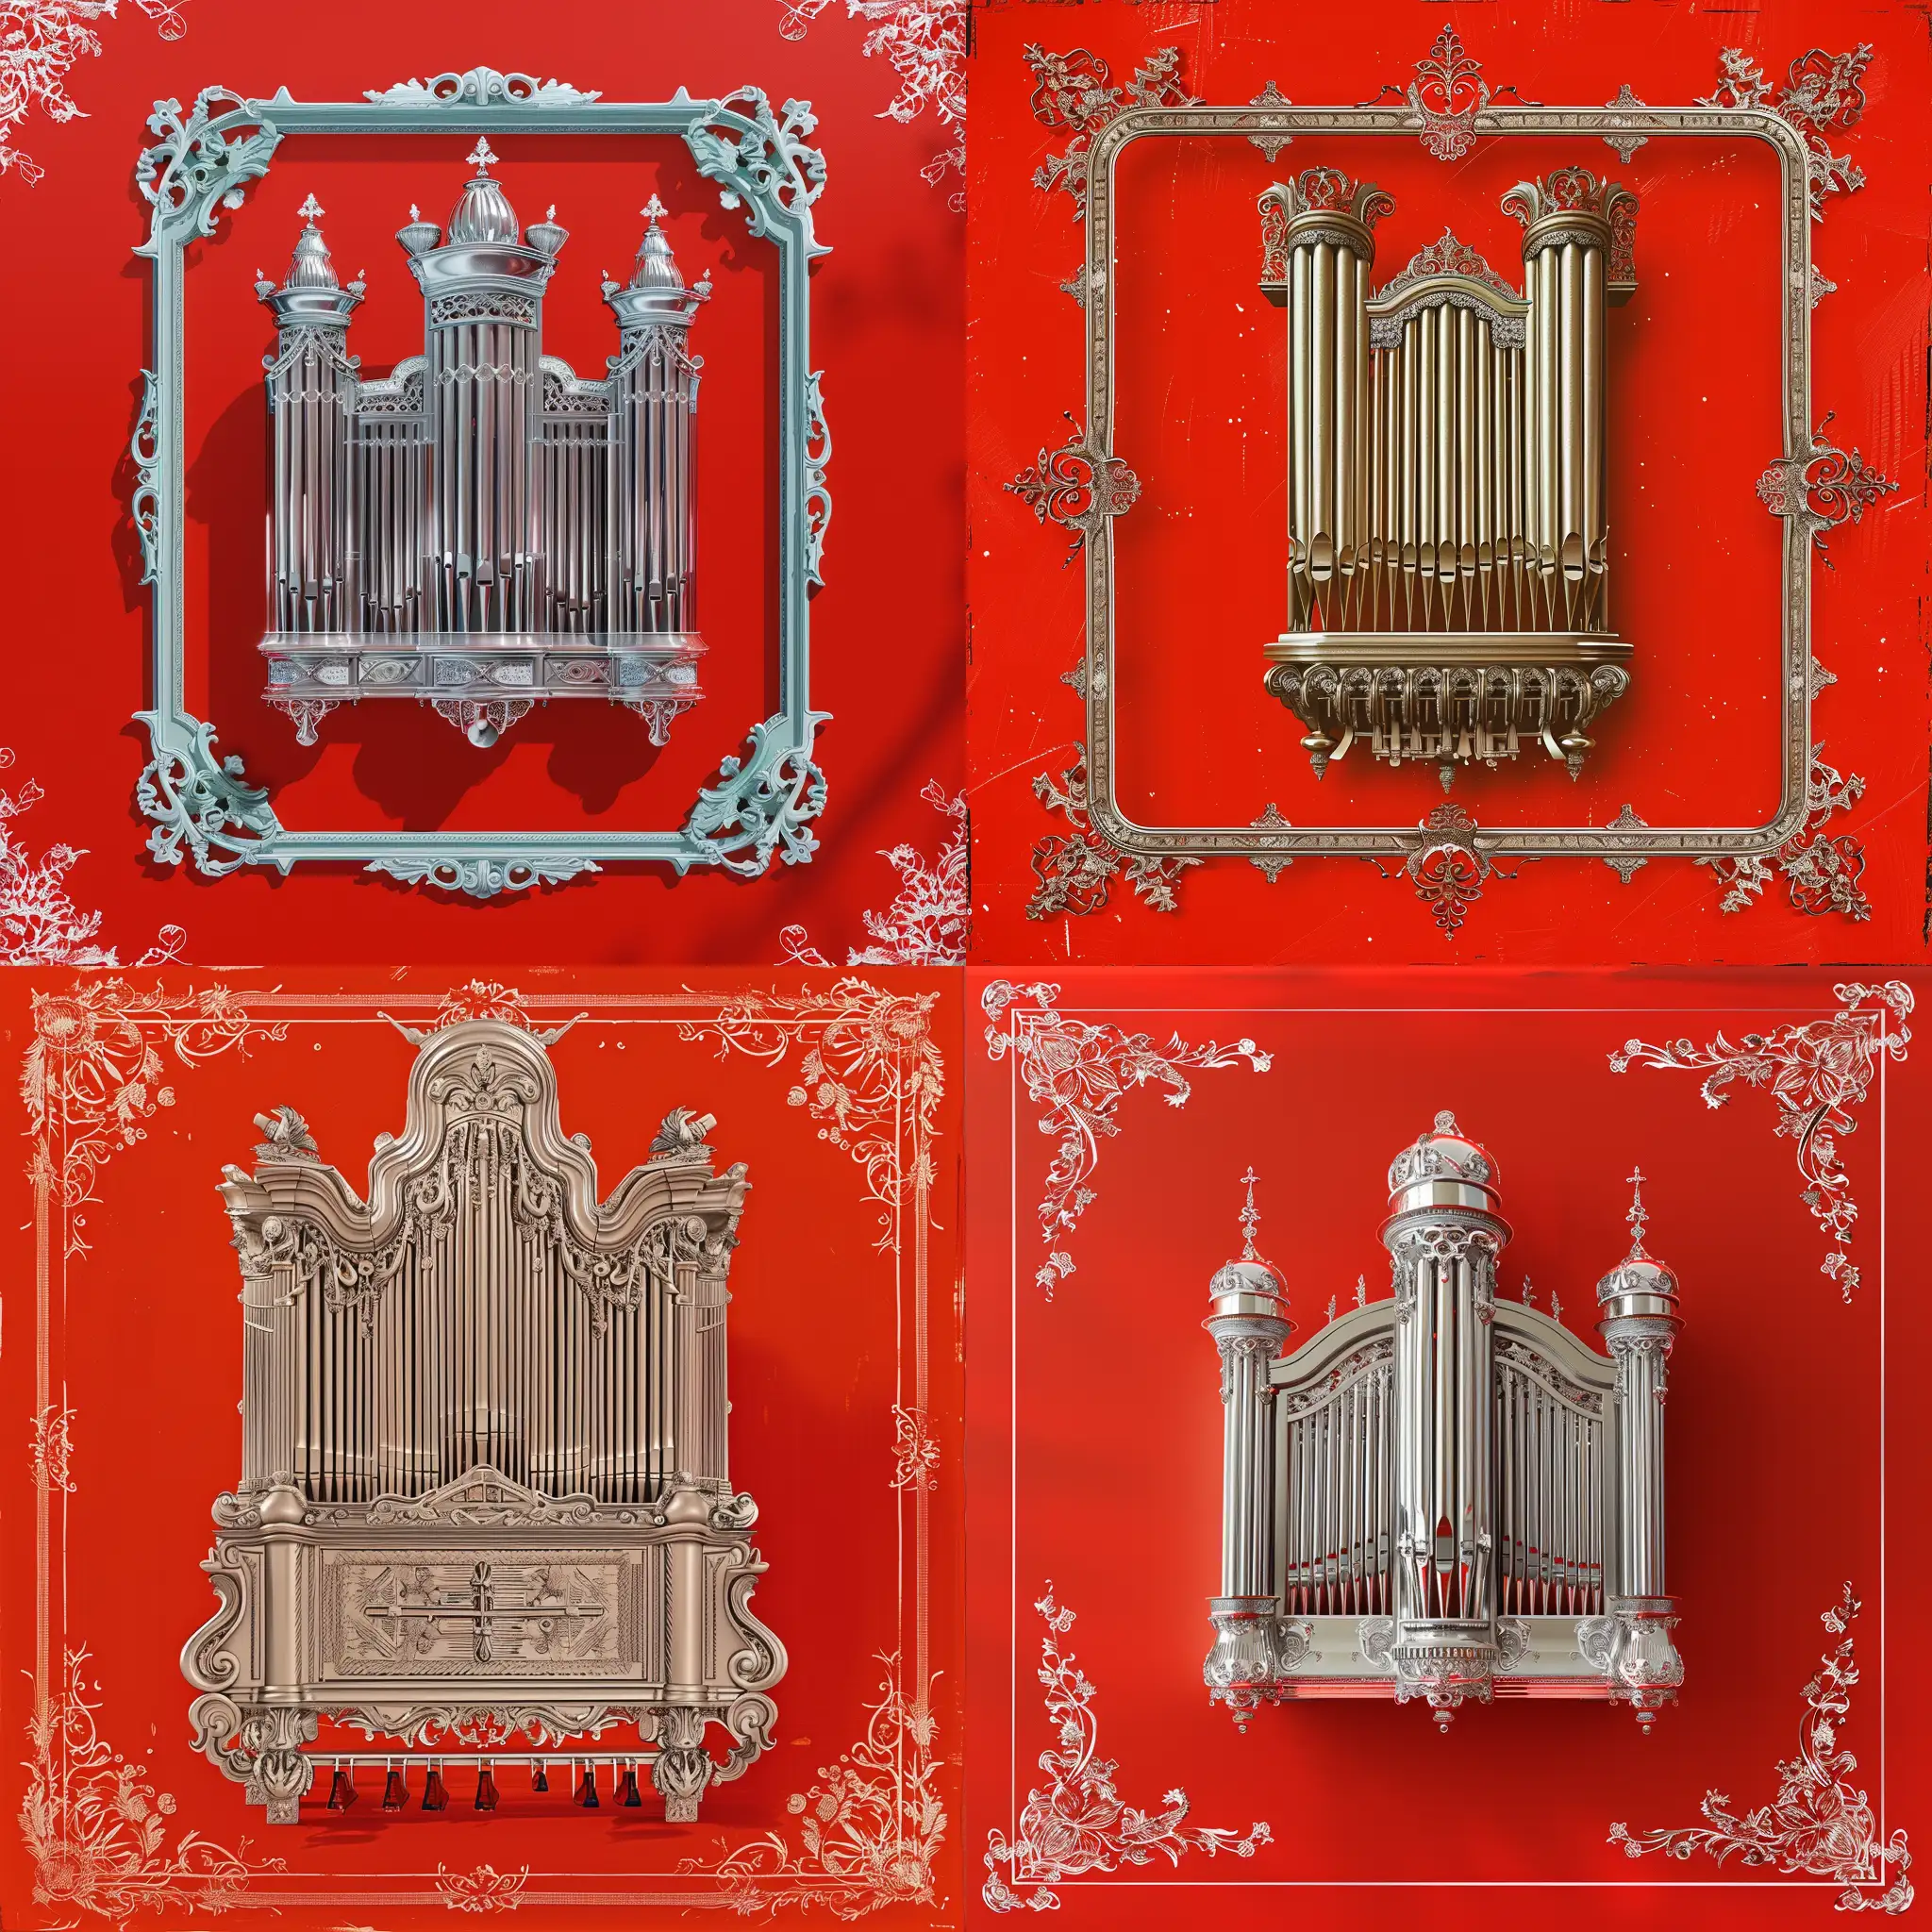 Silver-Slavic-Organ-on-Bright-Red-Background-with-Delicate-Filigree-Frame